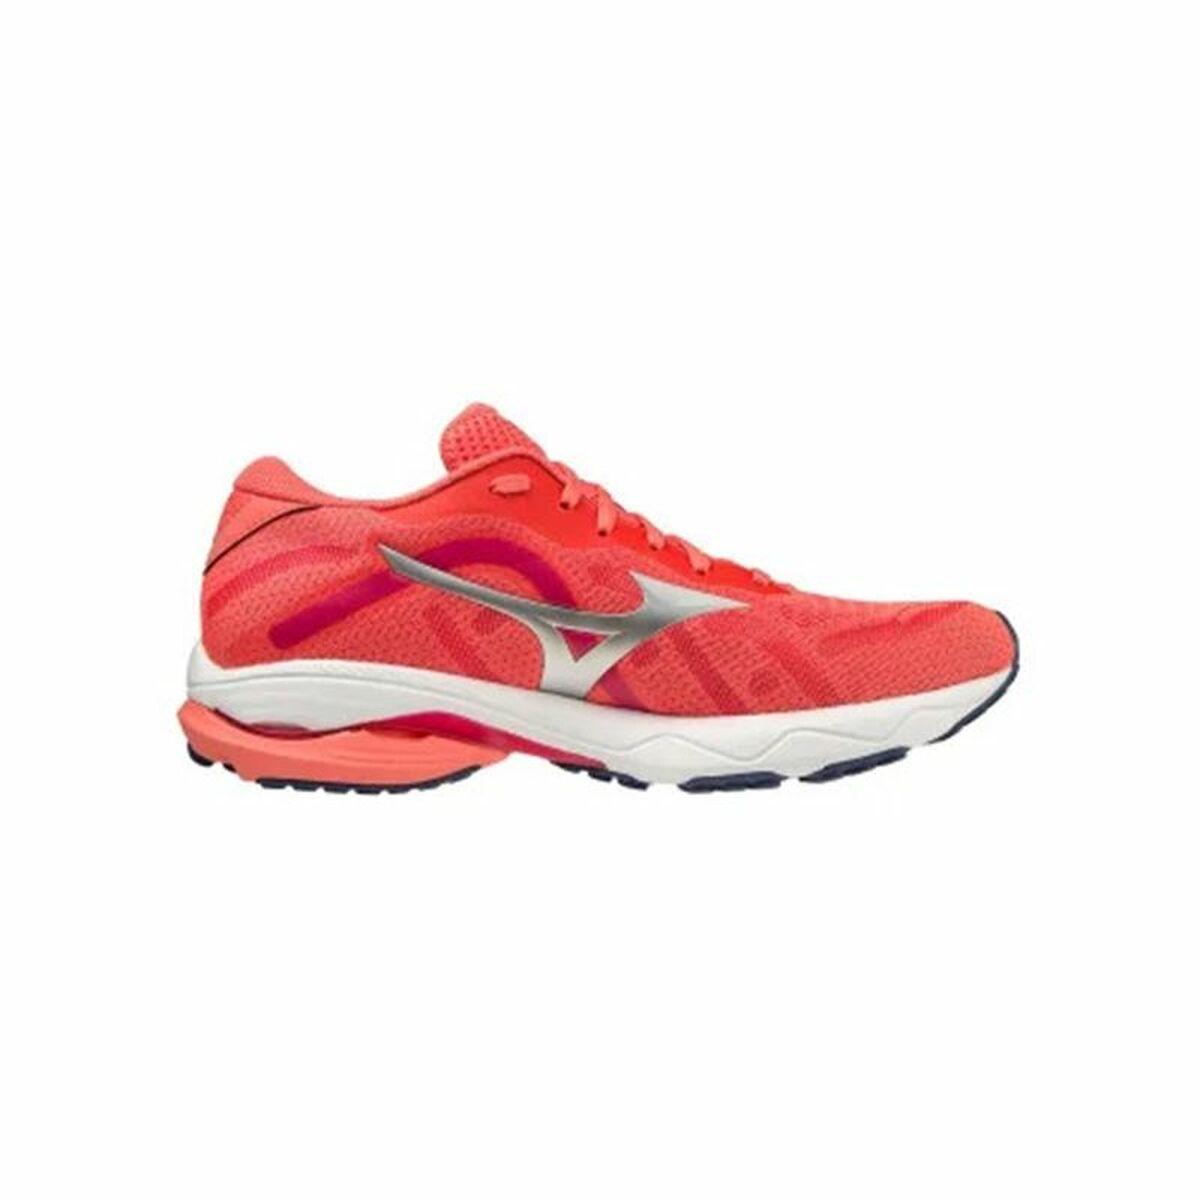 Mizuno Running Shoes For Adults Wave Ultima 13 Lady Orange in Red | Lyst UK